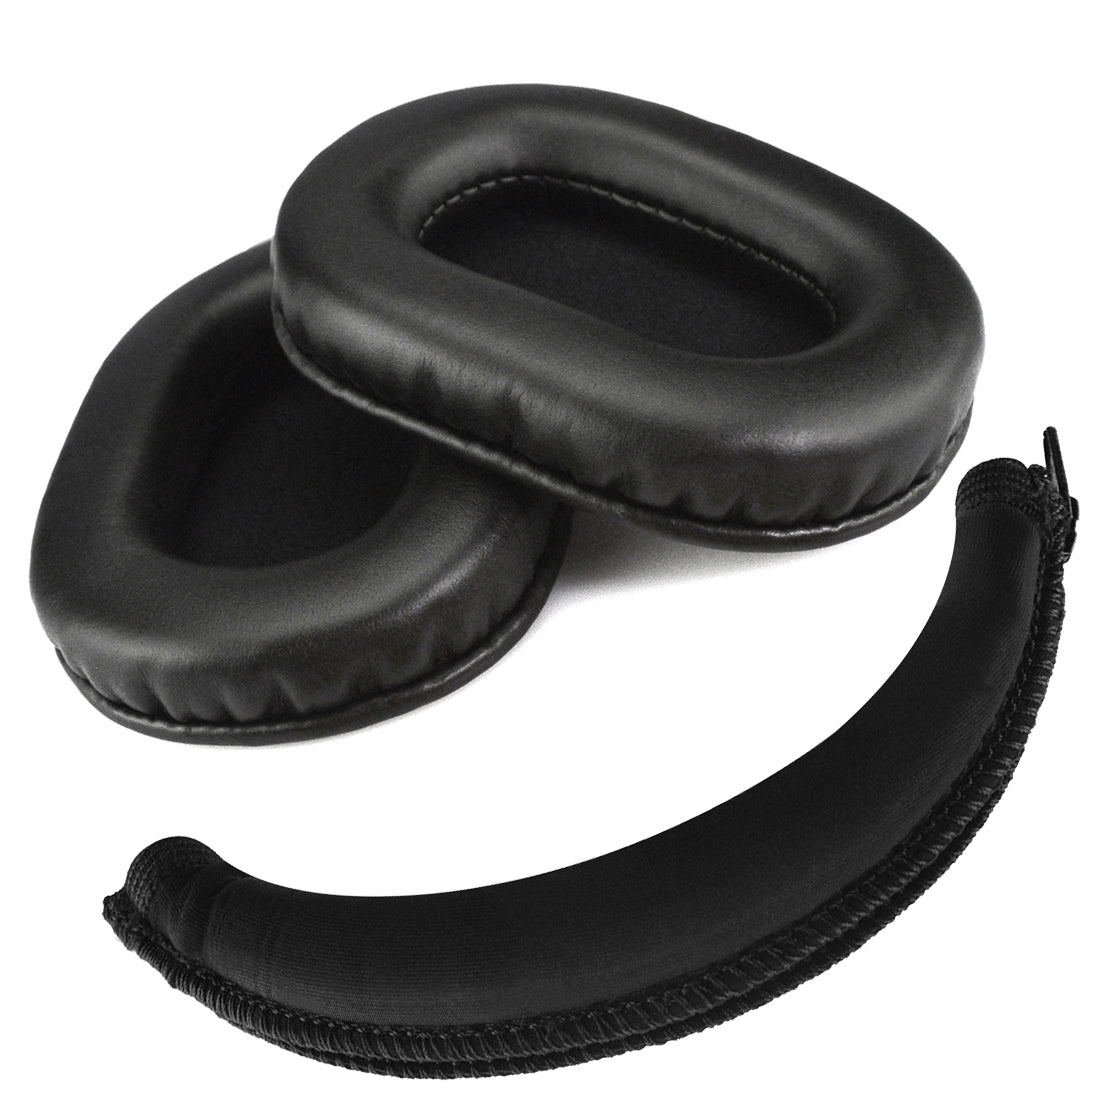 Geekria Earpad + Headband Compatible with SONY MDR-7506, MDR-V6, MDR-C